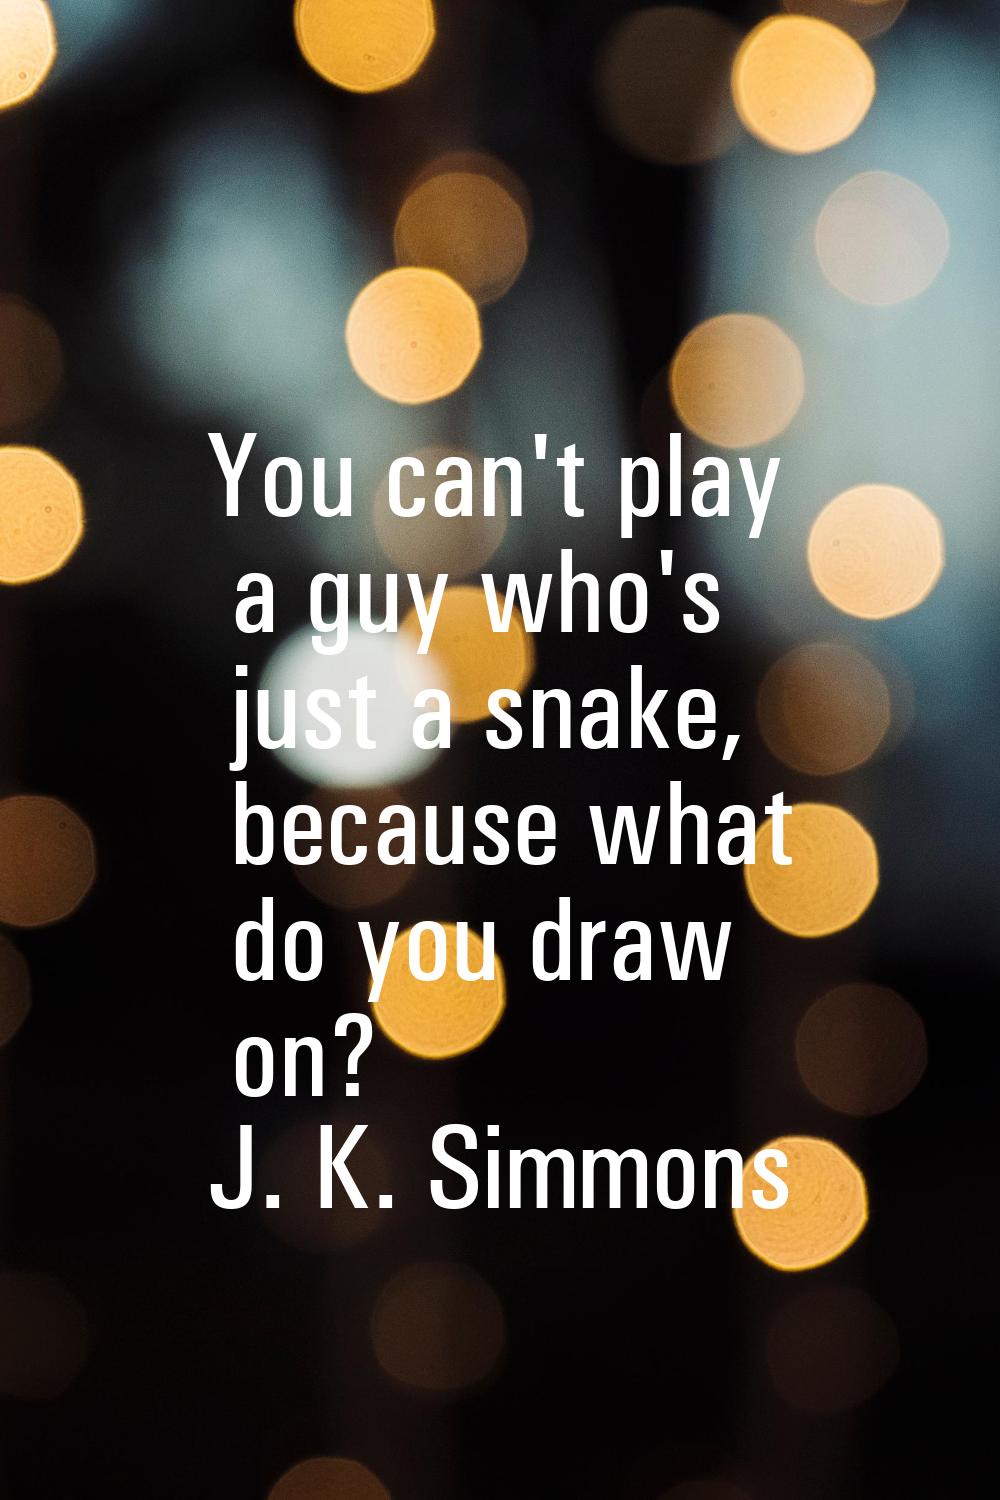 You can't play a guy who's just a snake, because what do you draw on?